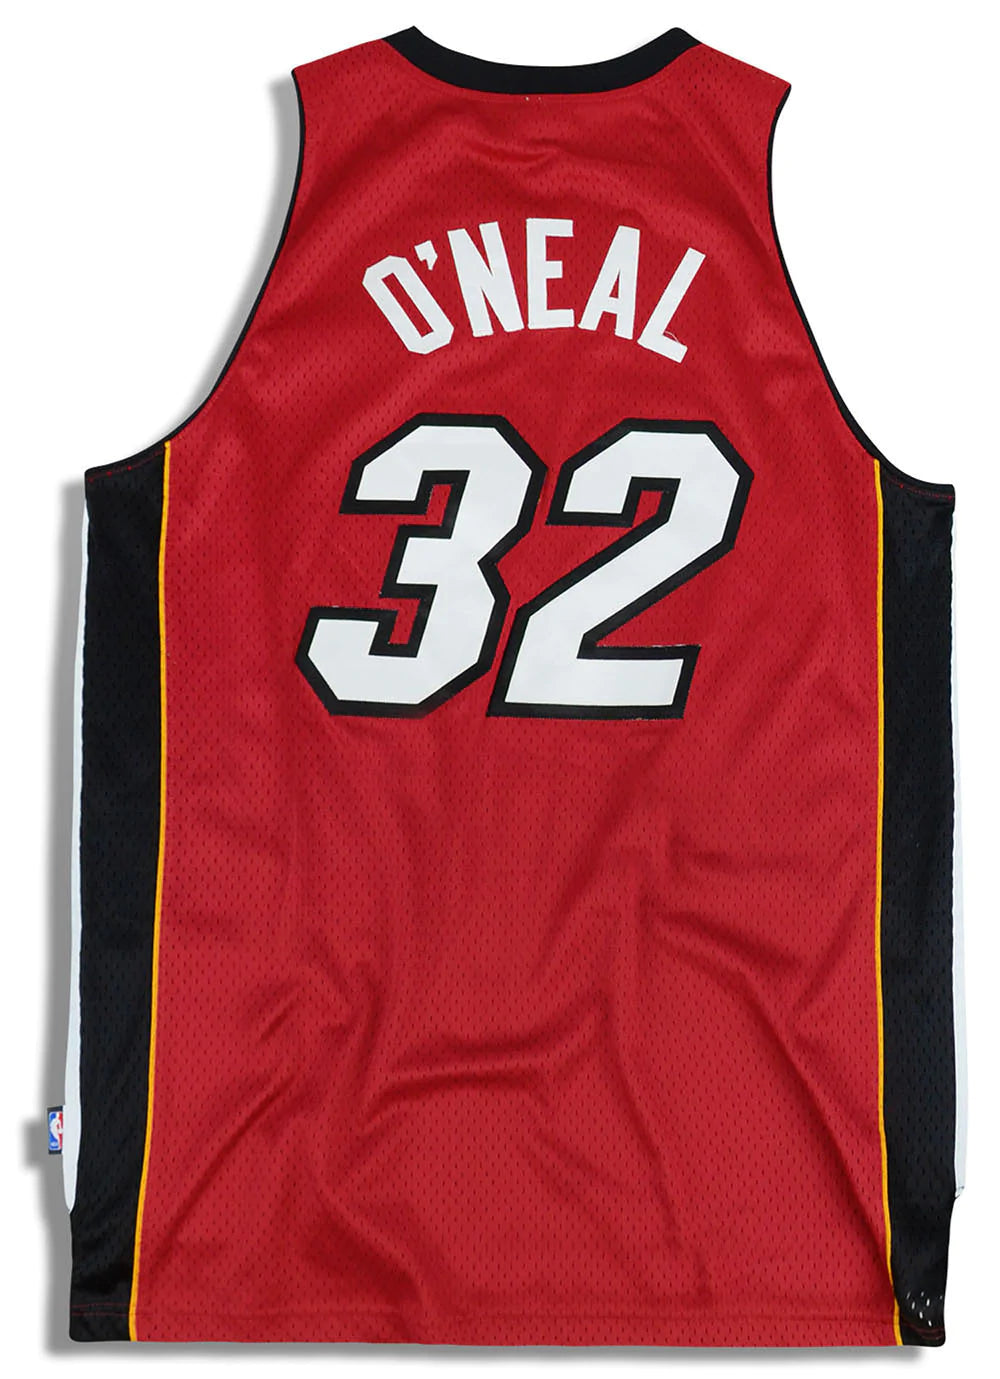 🏀 Shaquille O'Neal Miami Heat Jersey Size Small – The Throwback Store 🏀